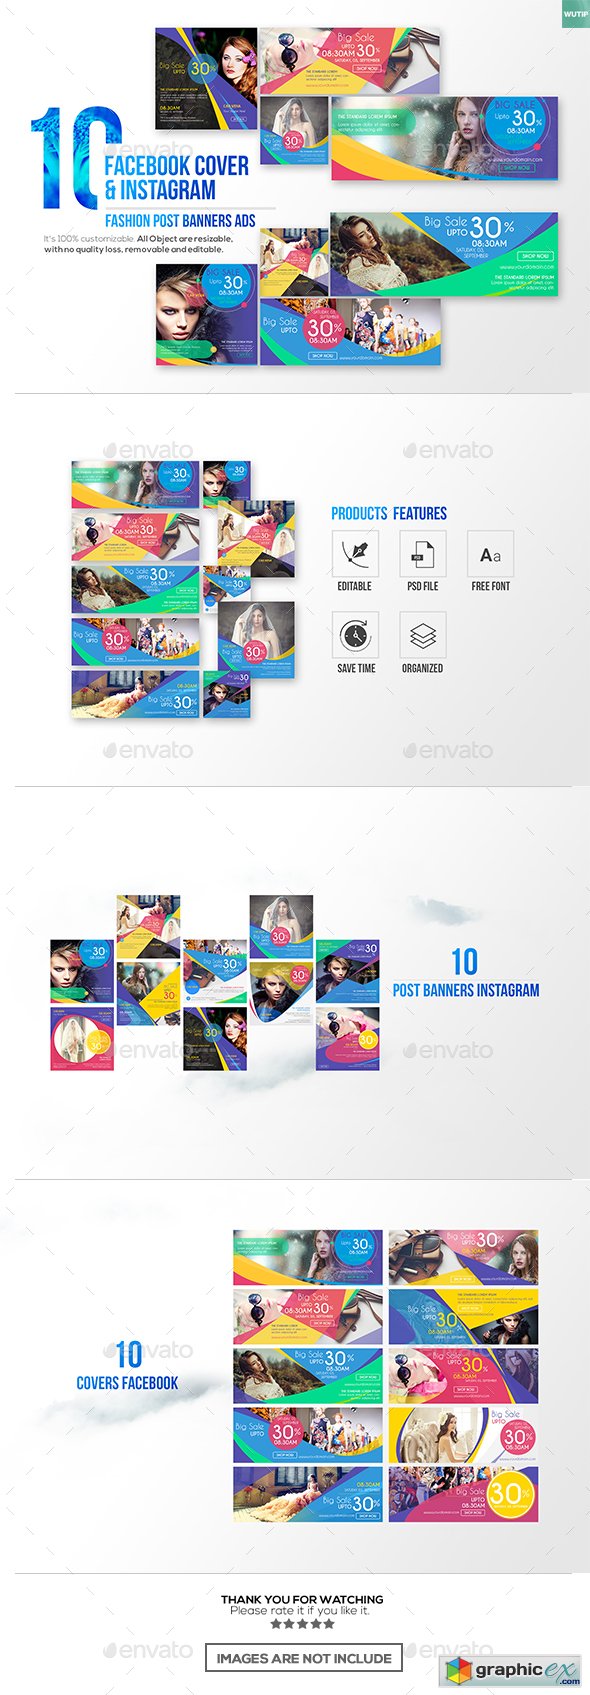 10 Facebook Cover & 10 Instagram Fashion Post Banners Ads